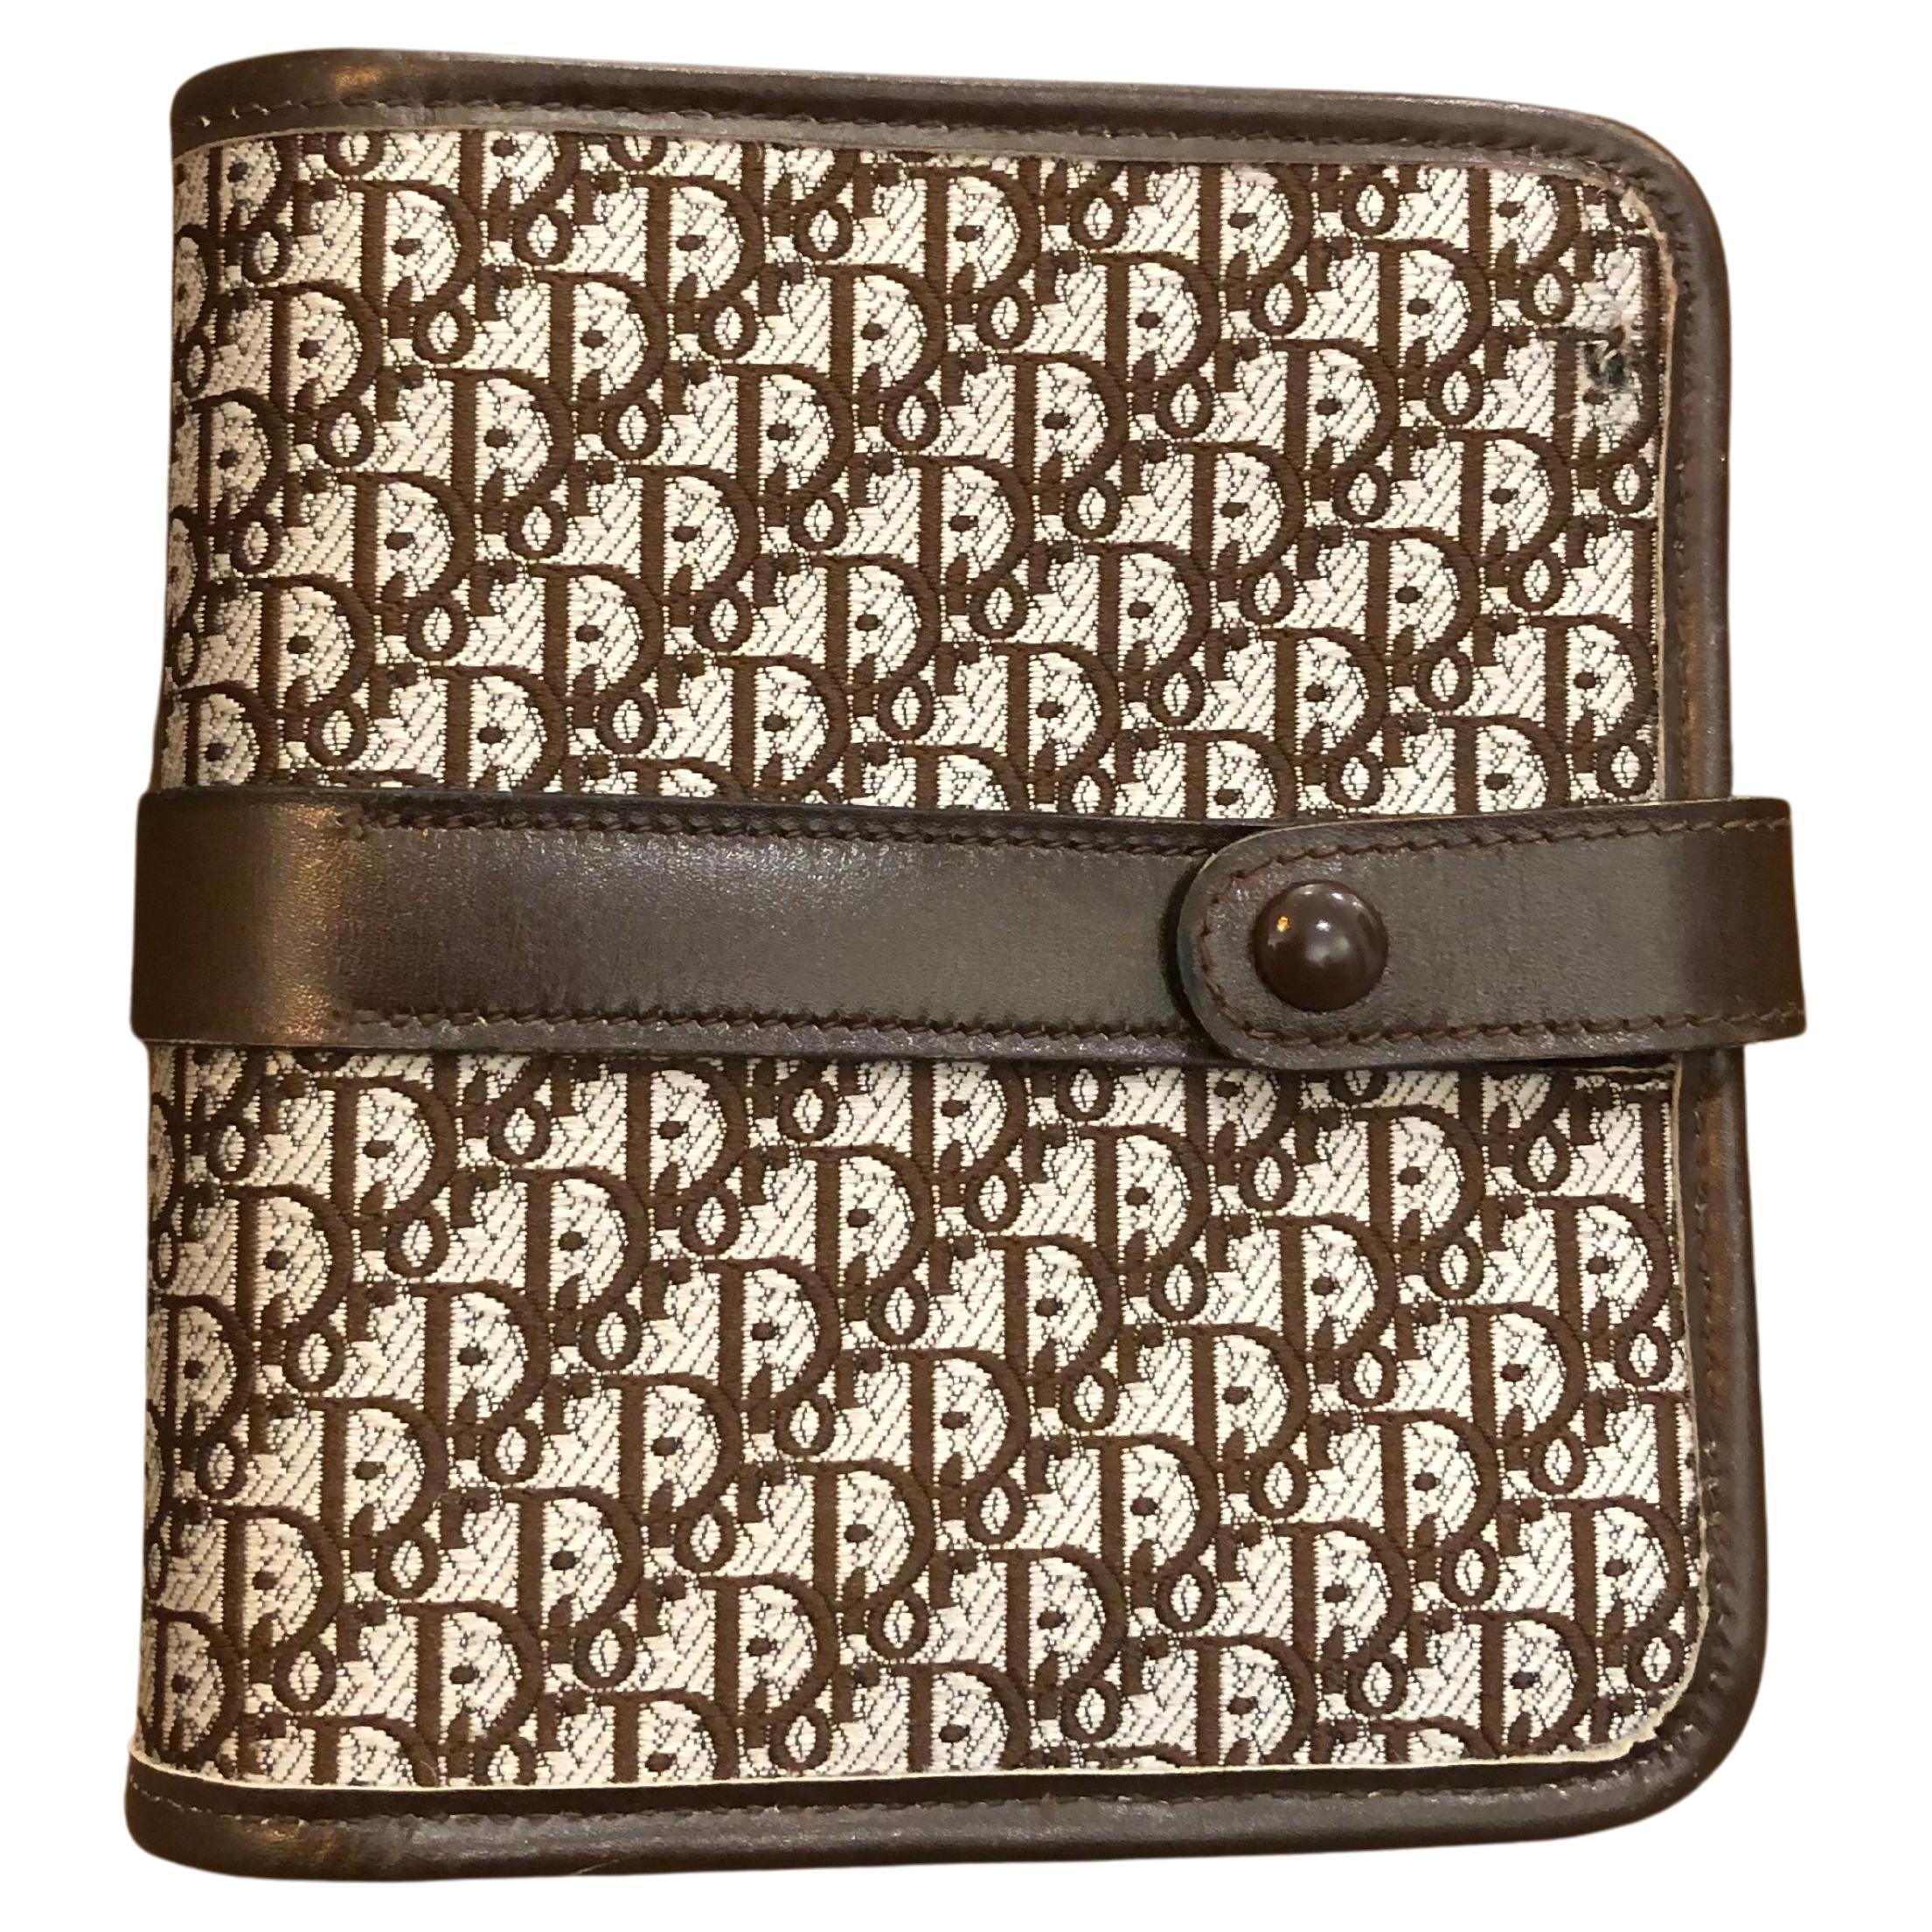 This vintage CHRISTIAN DIOR BI-fold short wallet is crafted of CD’s iconic micro Trotter jacquard in brown. Snap fastening opens to a smooth leather interior in brown featuring 1 card slot, 1 coin, 1 bill, and 2 inner pockets. Made in France.